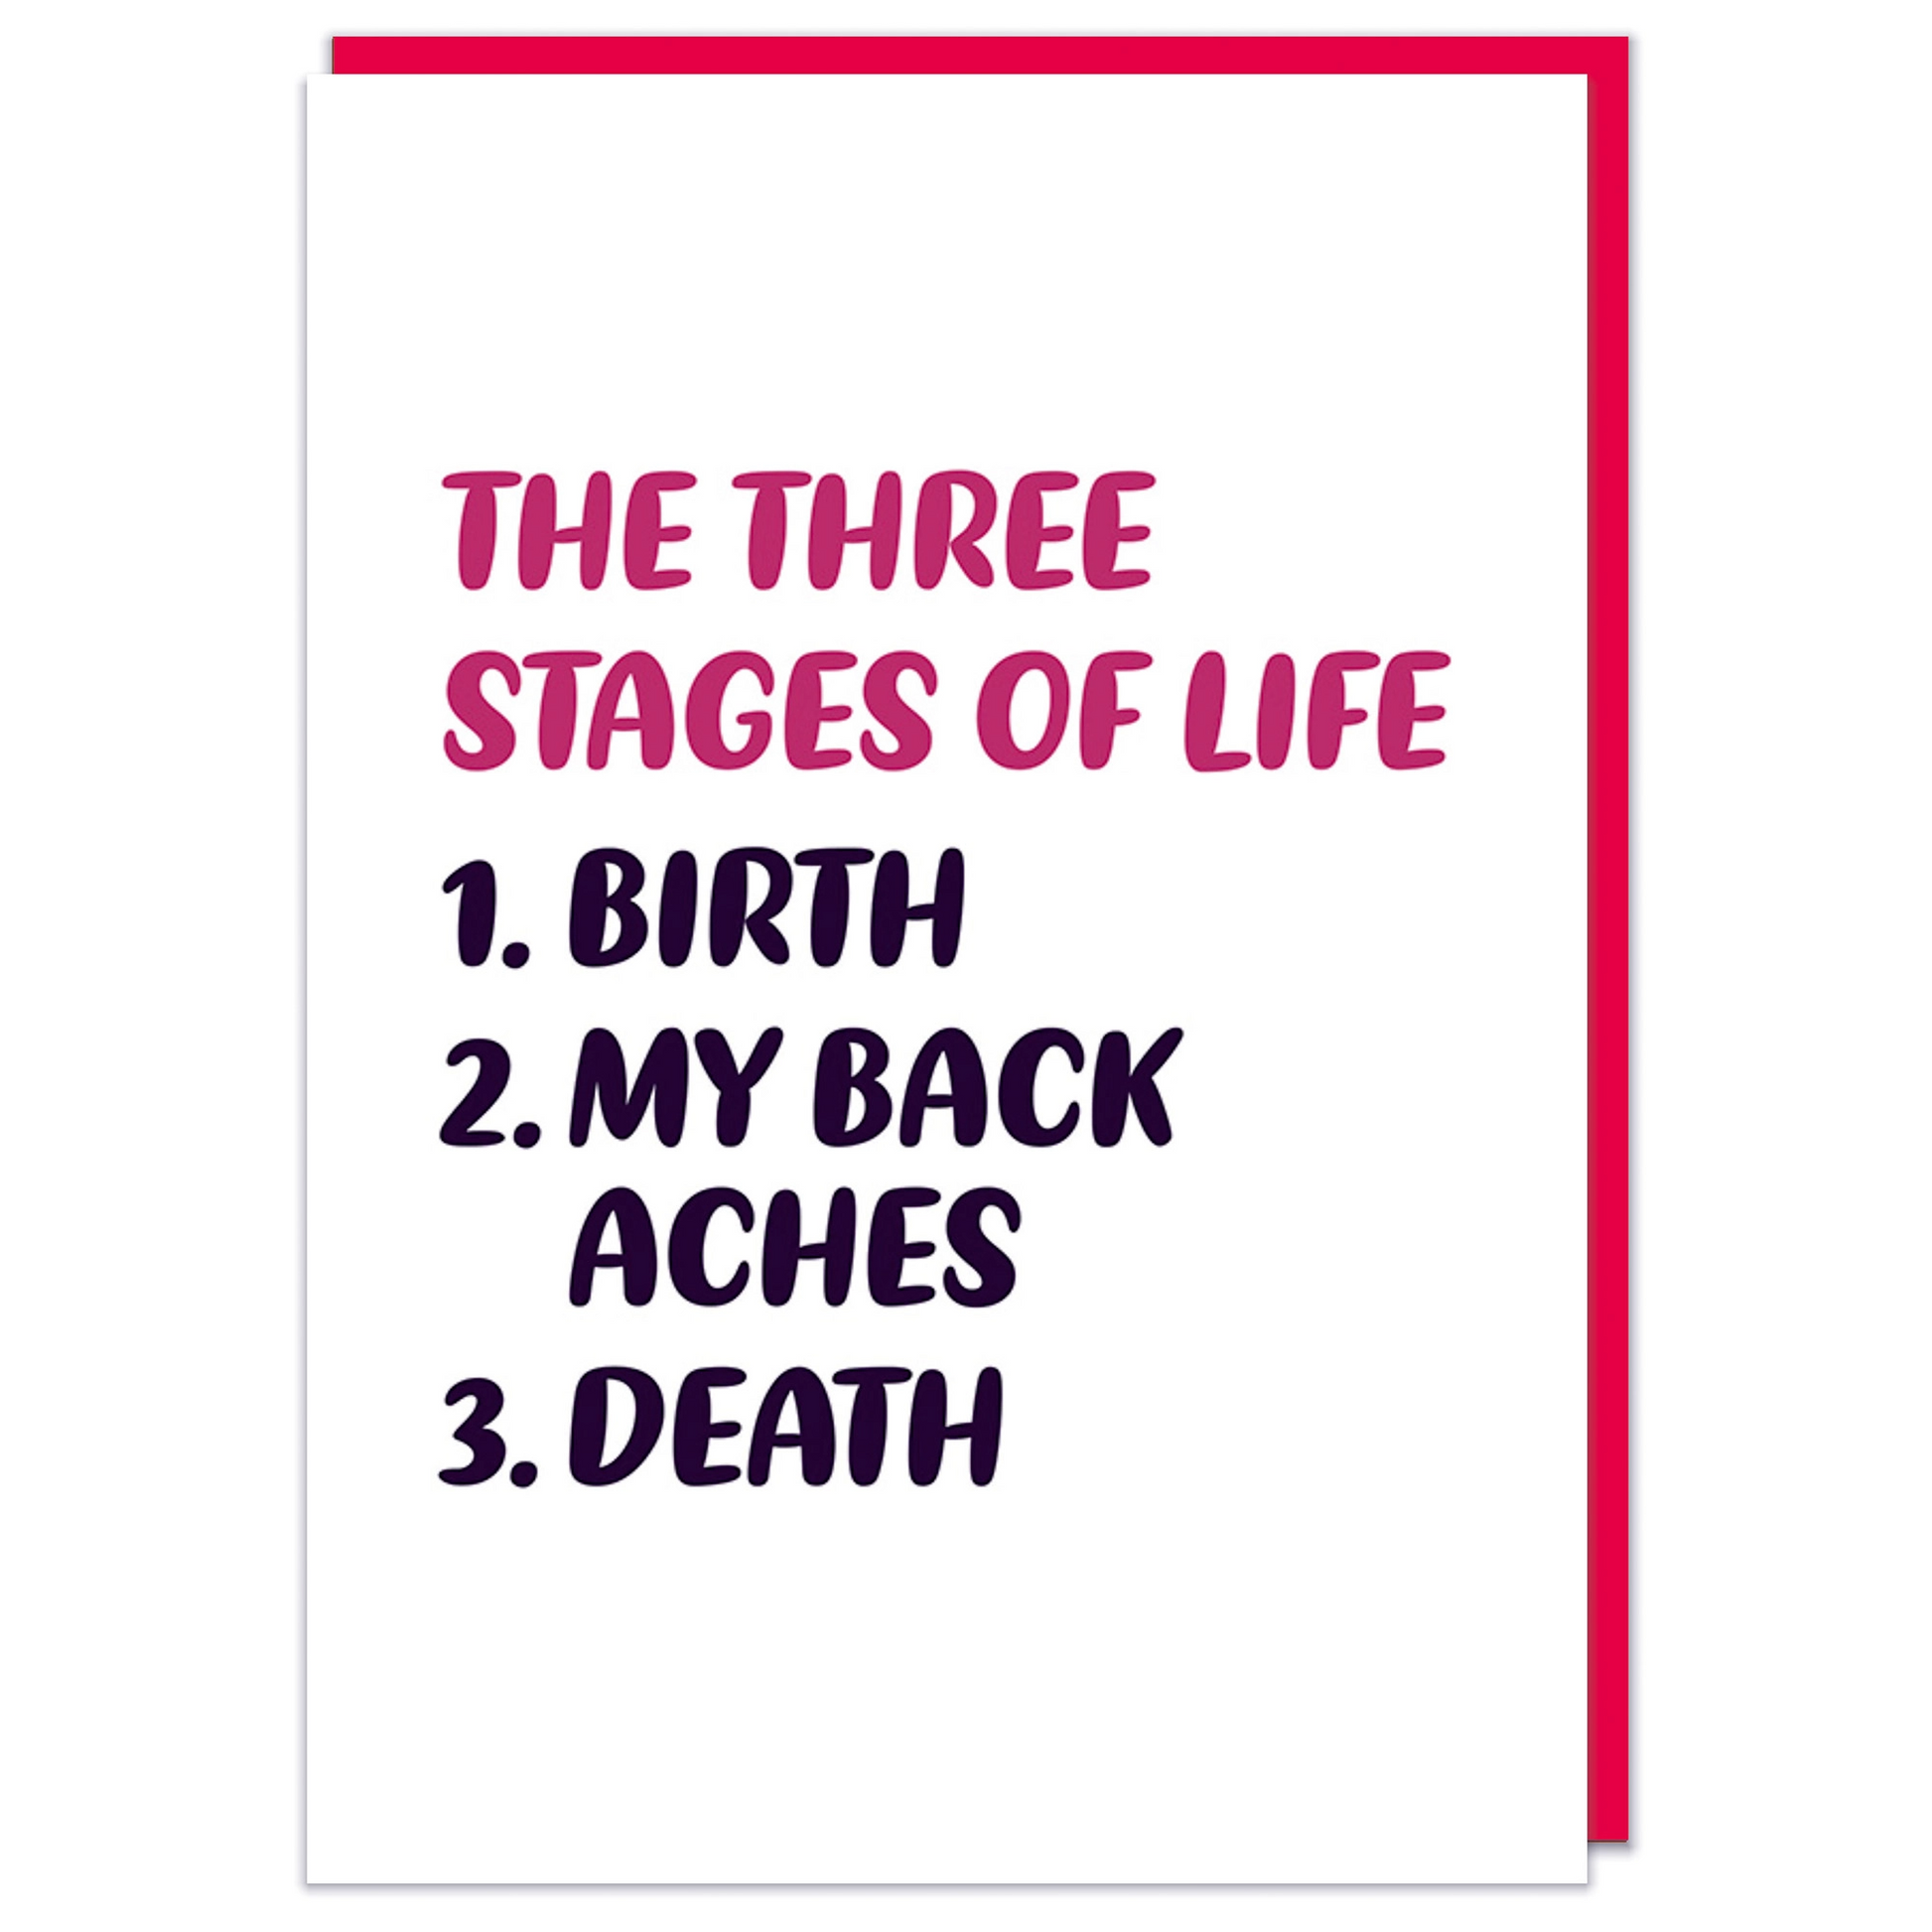 The Three Stages of Life - Birth, My Back Aches, Death - Greeting Card - Mellow Monkey